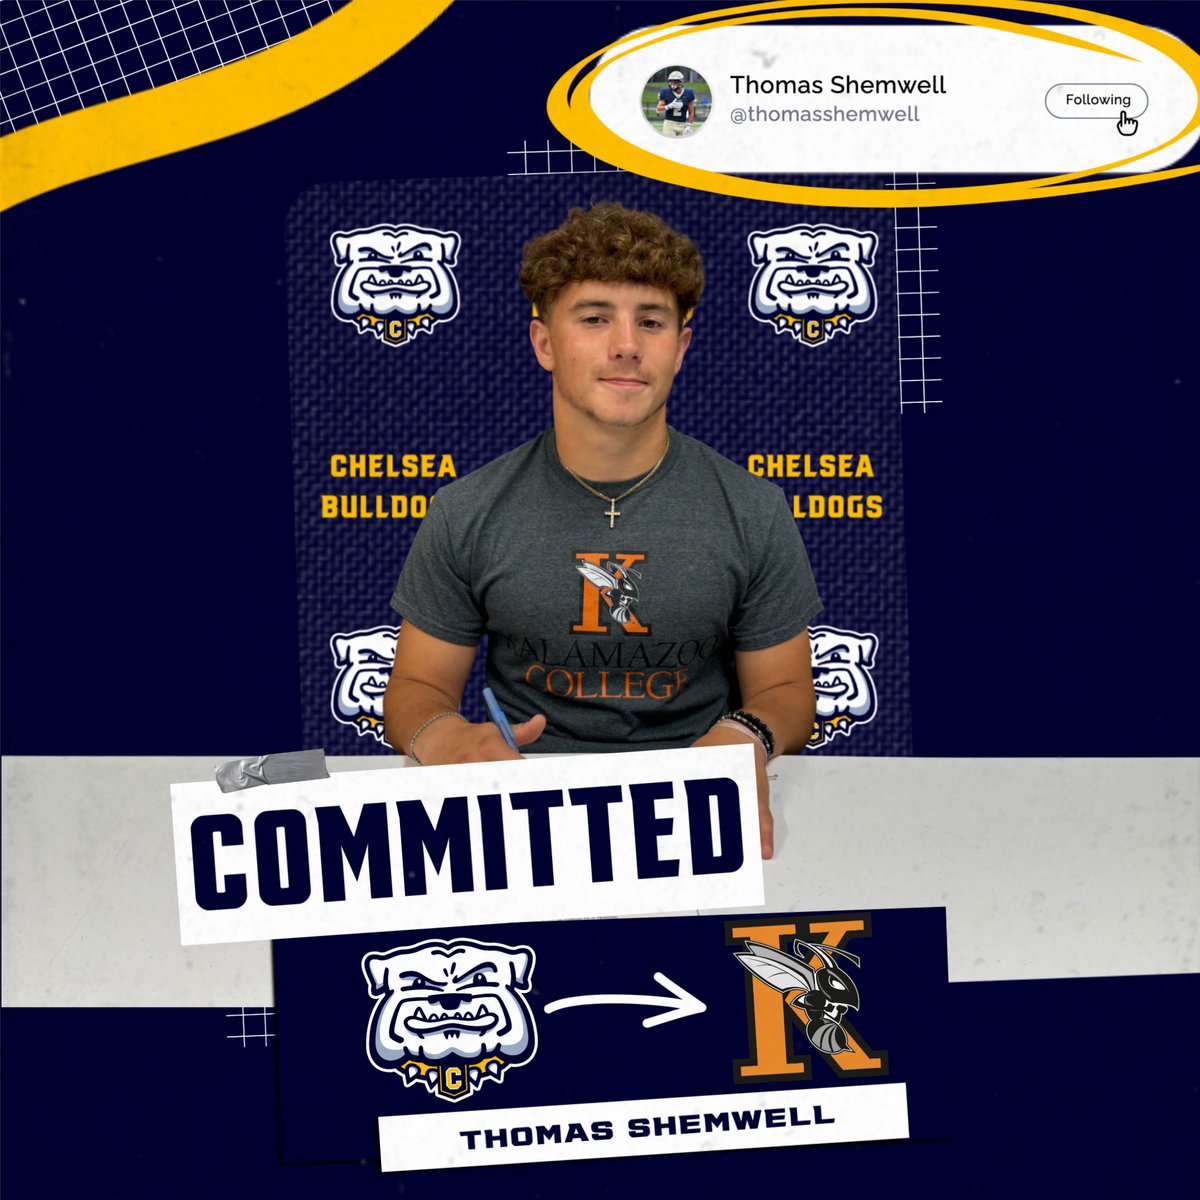 Congratulations to Thomas Shemwell who has committed to play football at Kalamazoo College! #ForTheC🐾